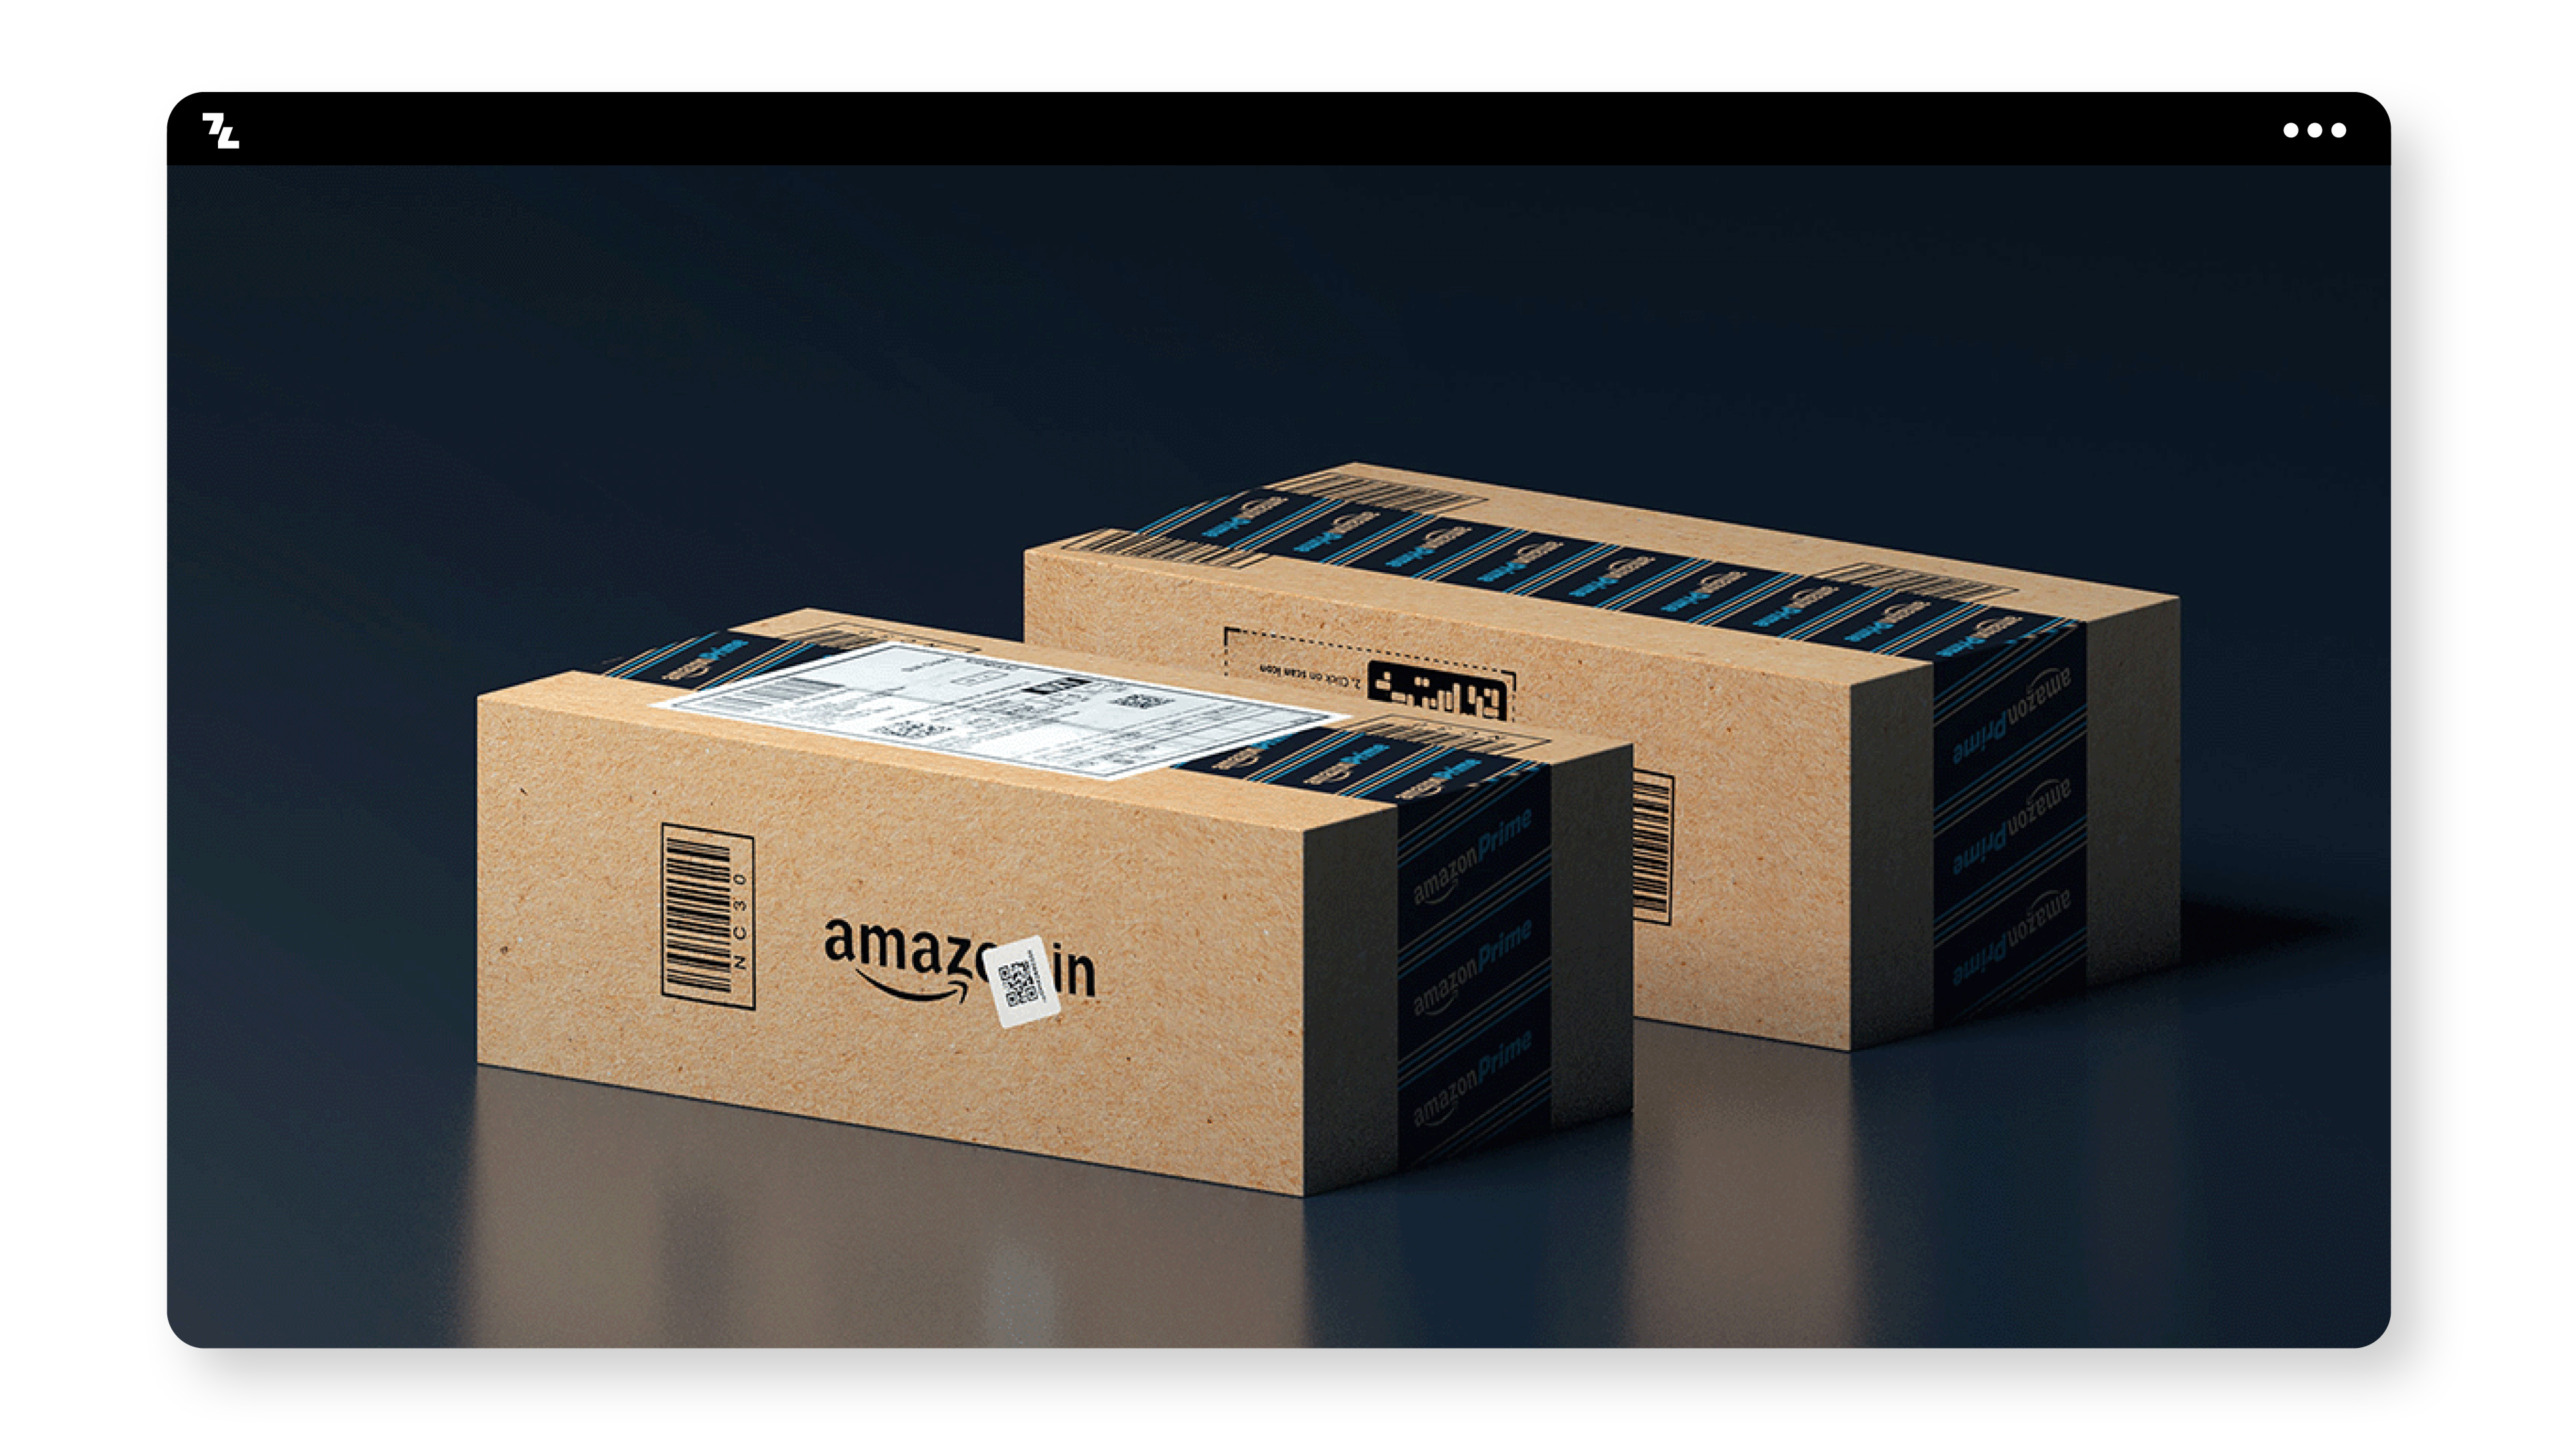 Example of Amazon branding with two boxes on a black background.